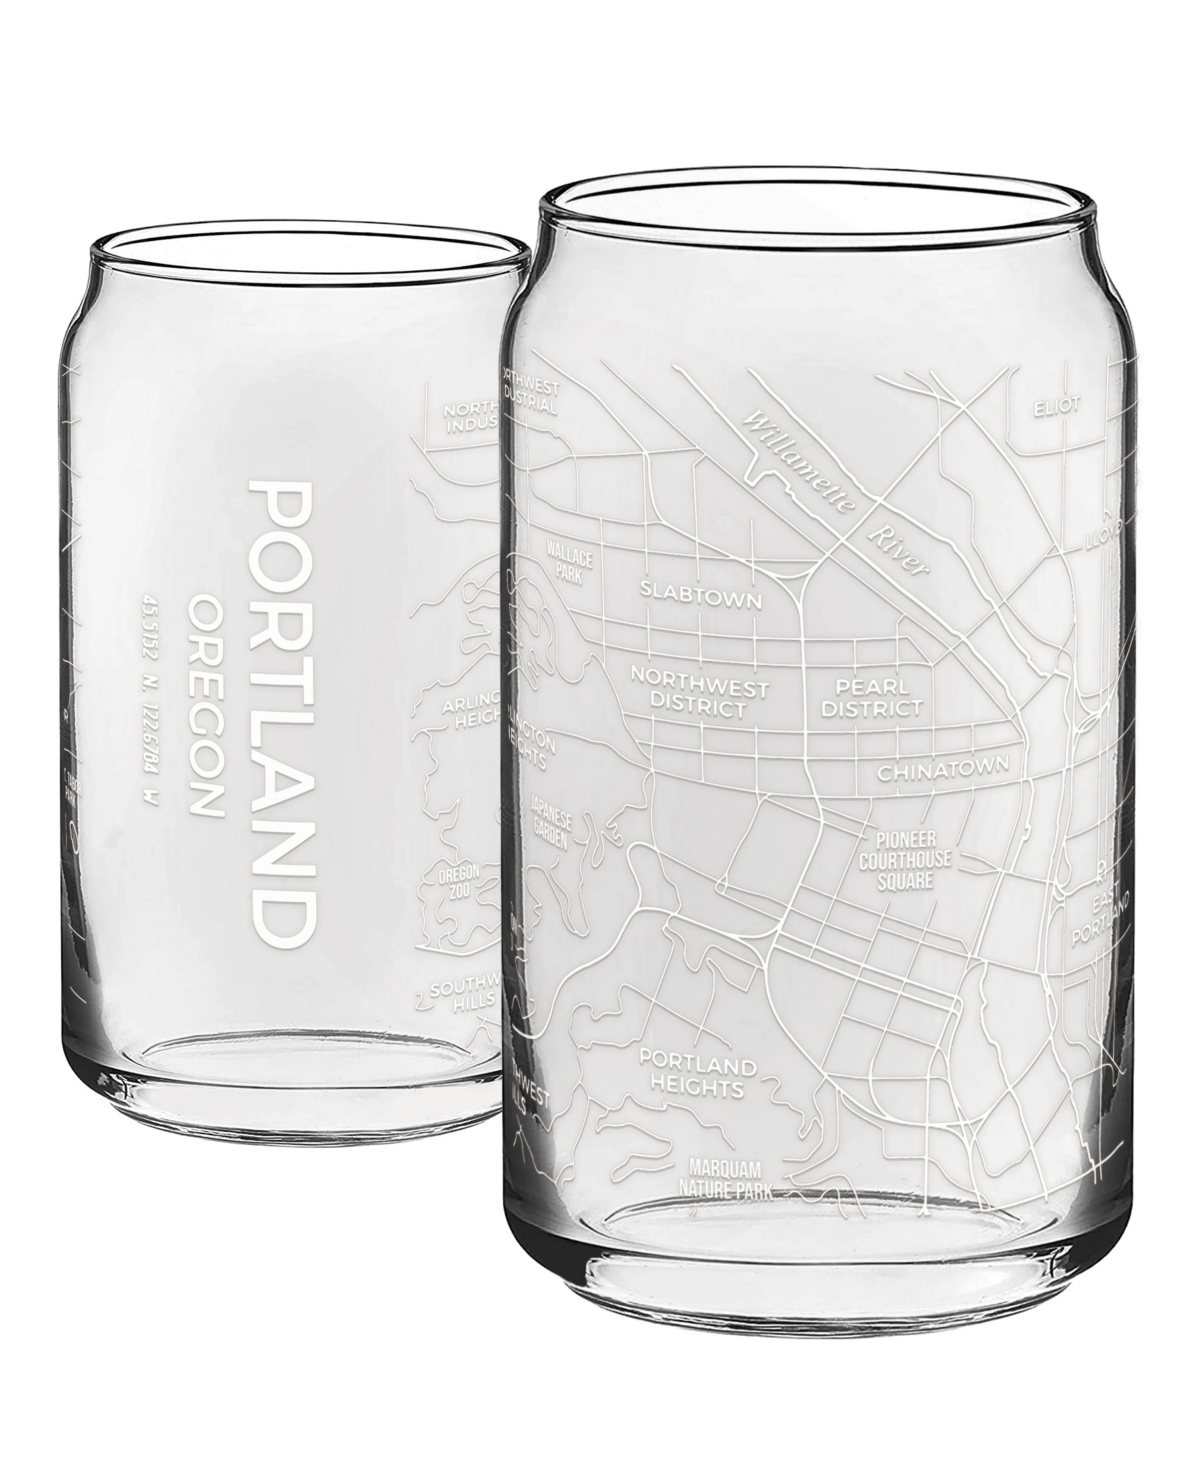 Narbo The Can Portland Or Map 16 oz Everyday Glassware, Set Of 2 In White